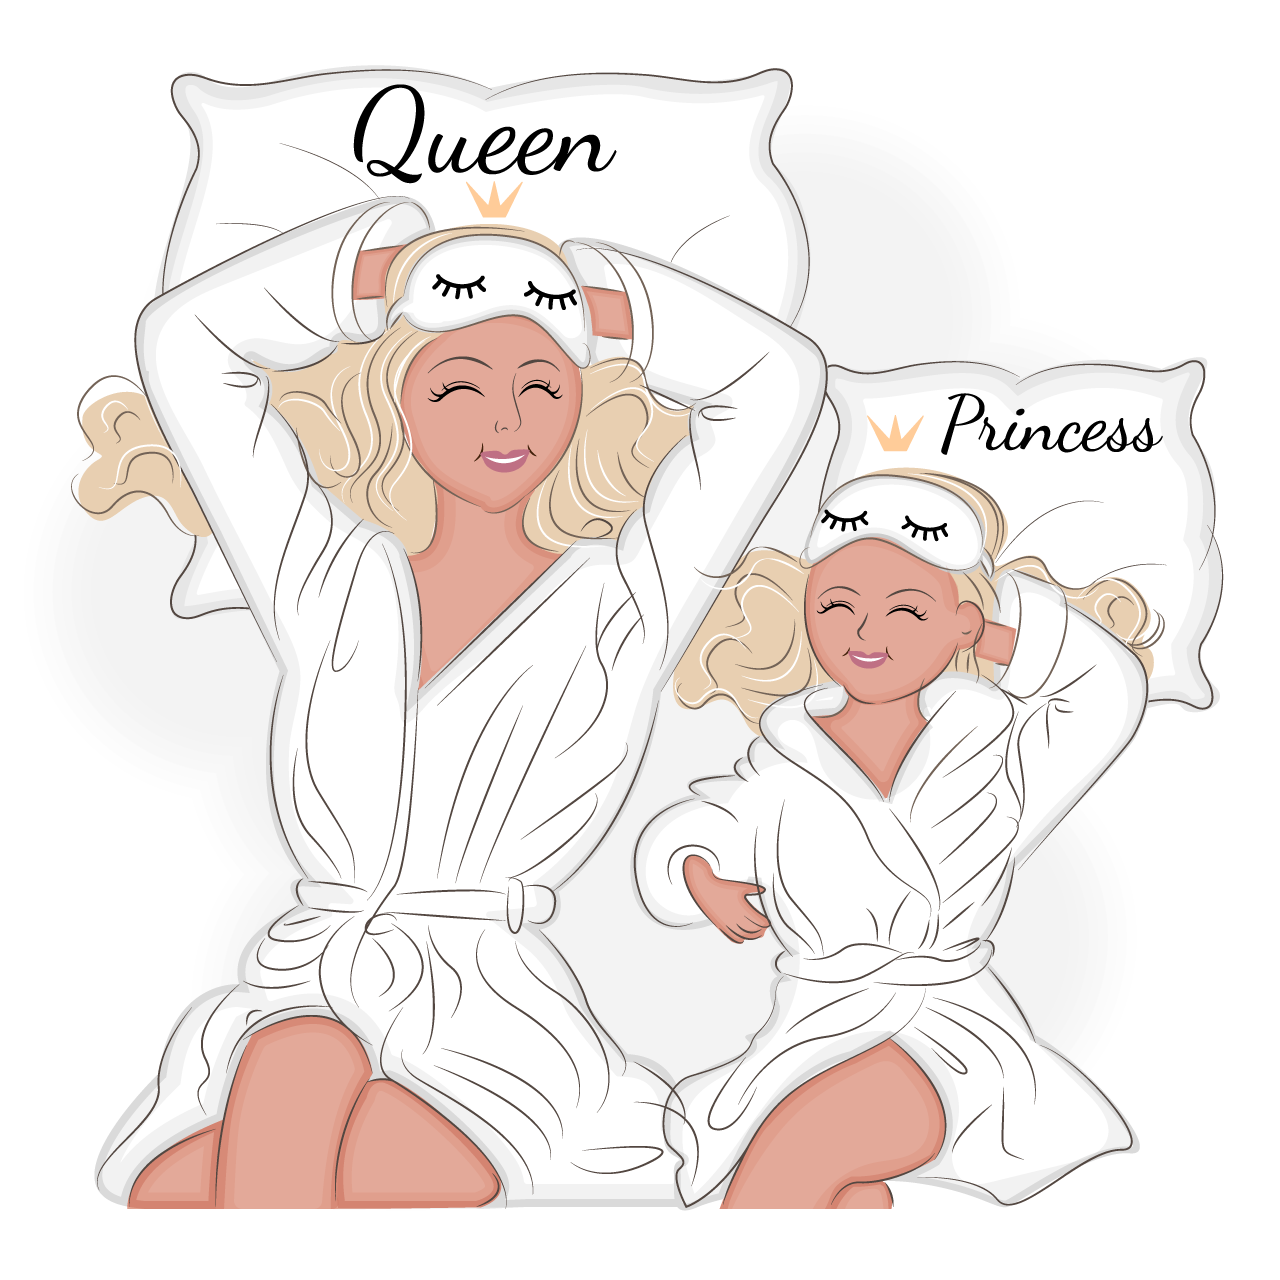 Mother daughter robe lying bed pajama party cute illustration